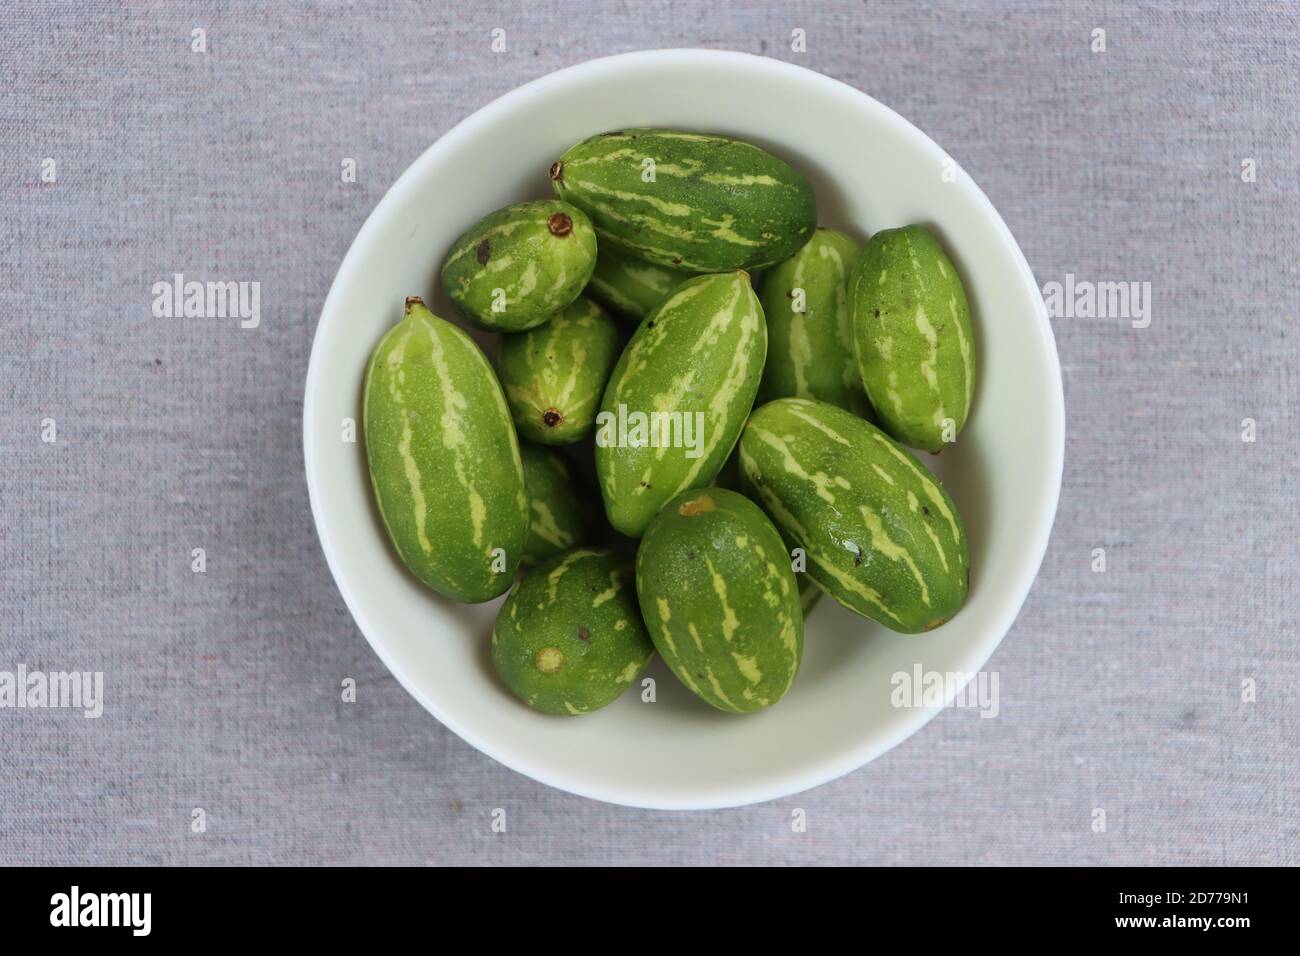 Ivy gourd or little gourds in white bowl Stock Photo